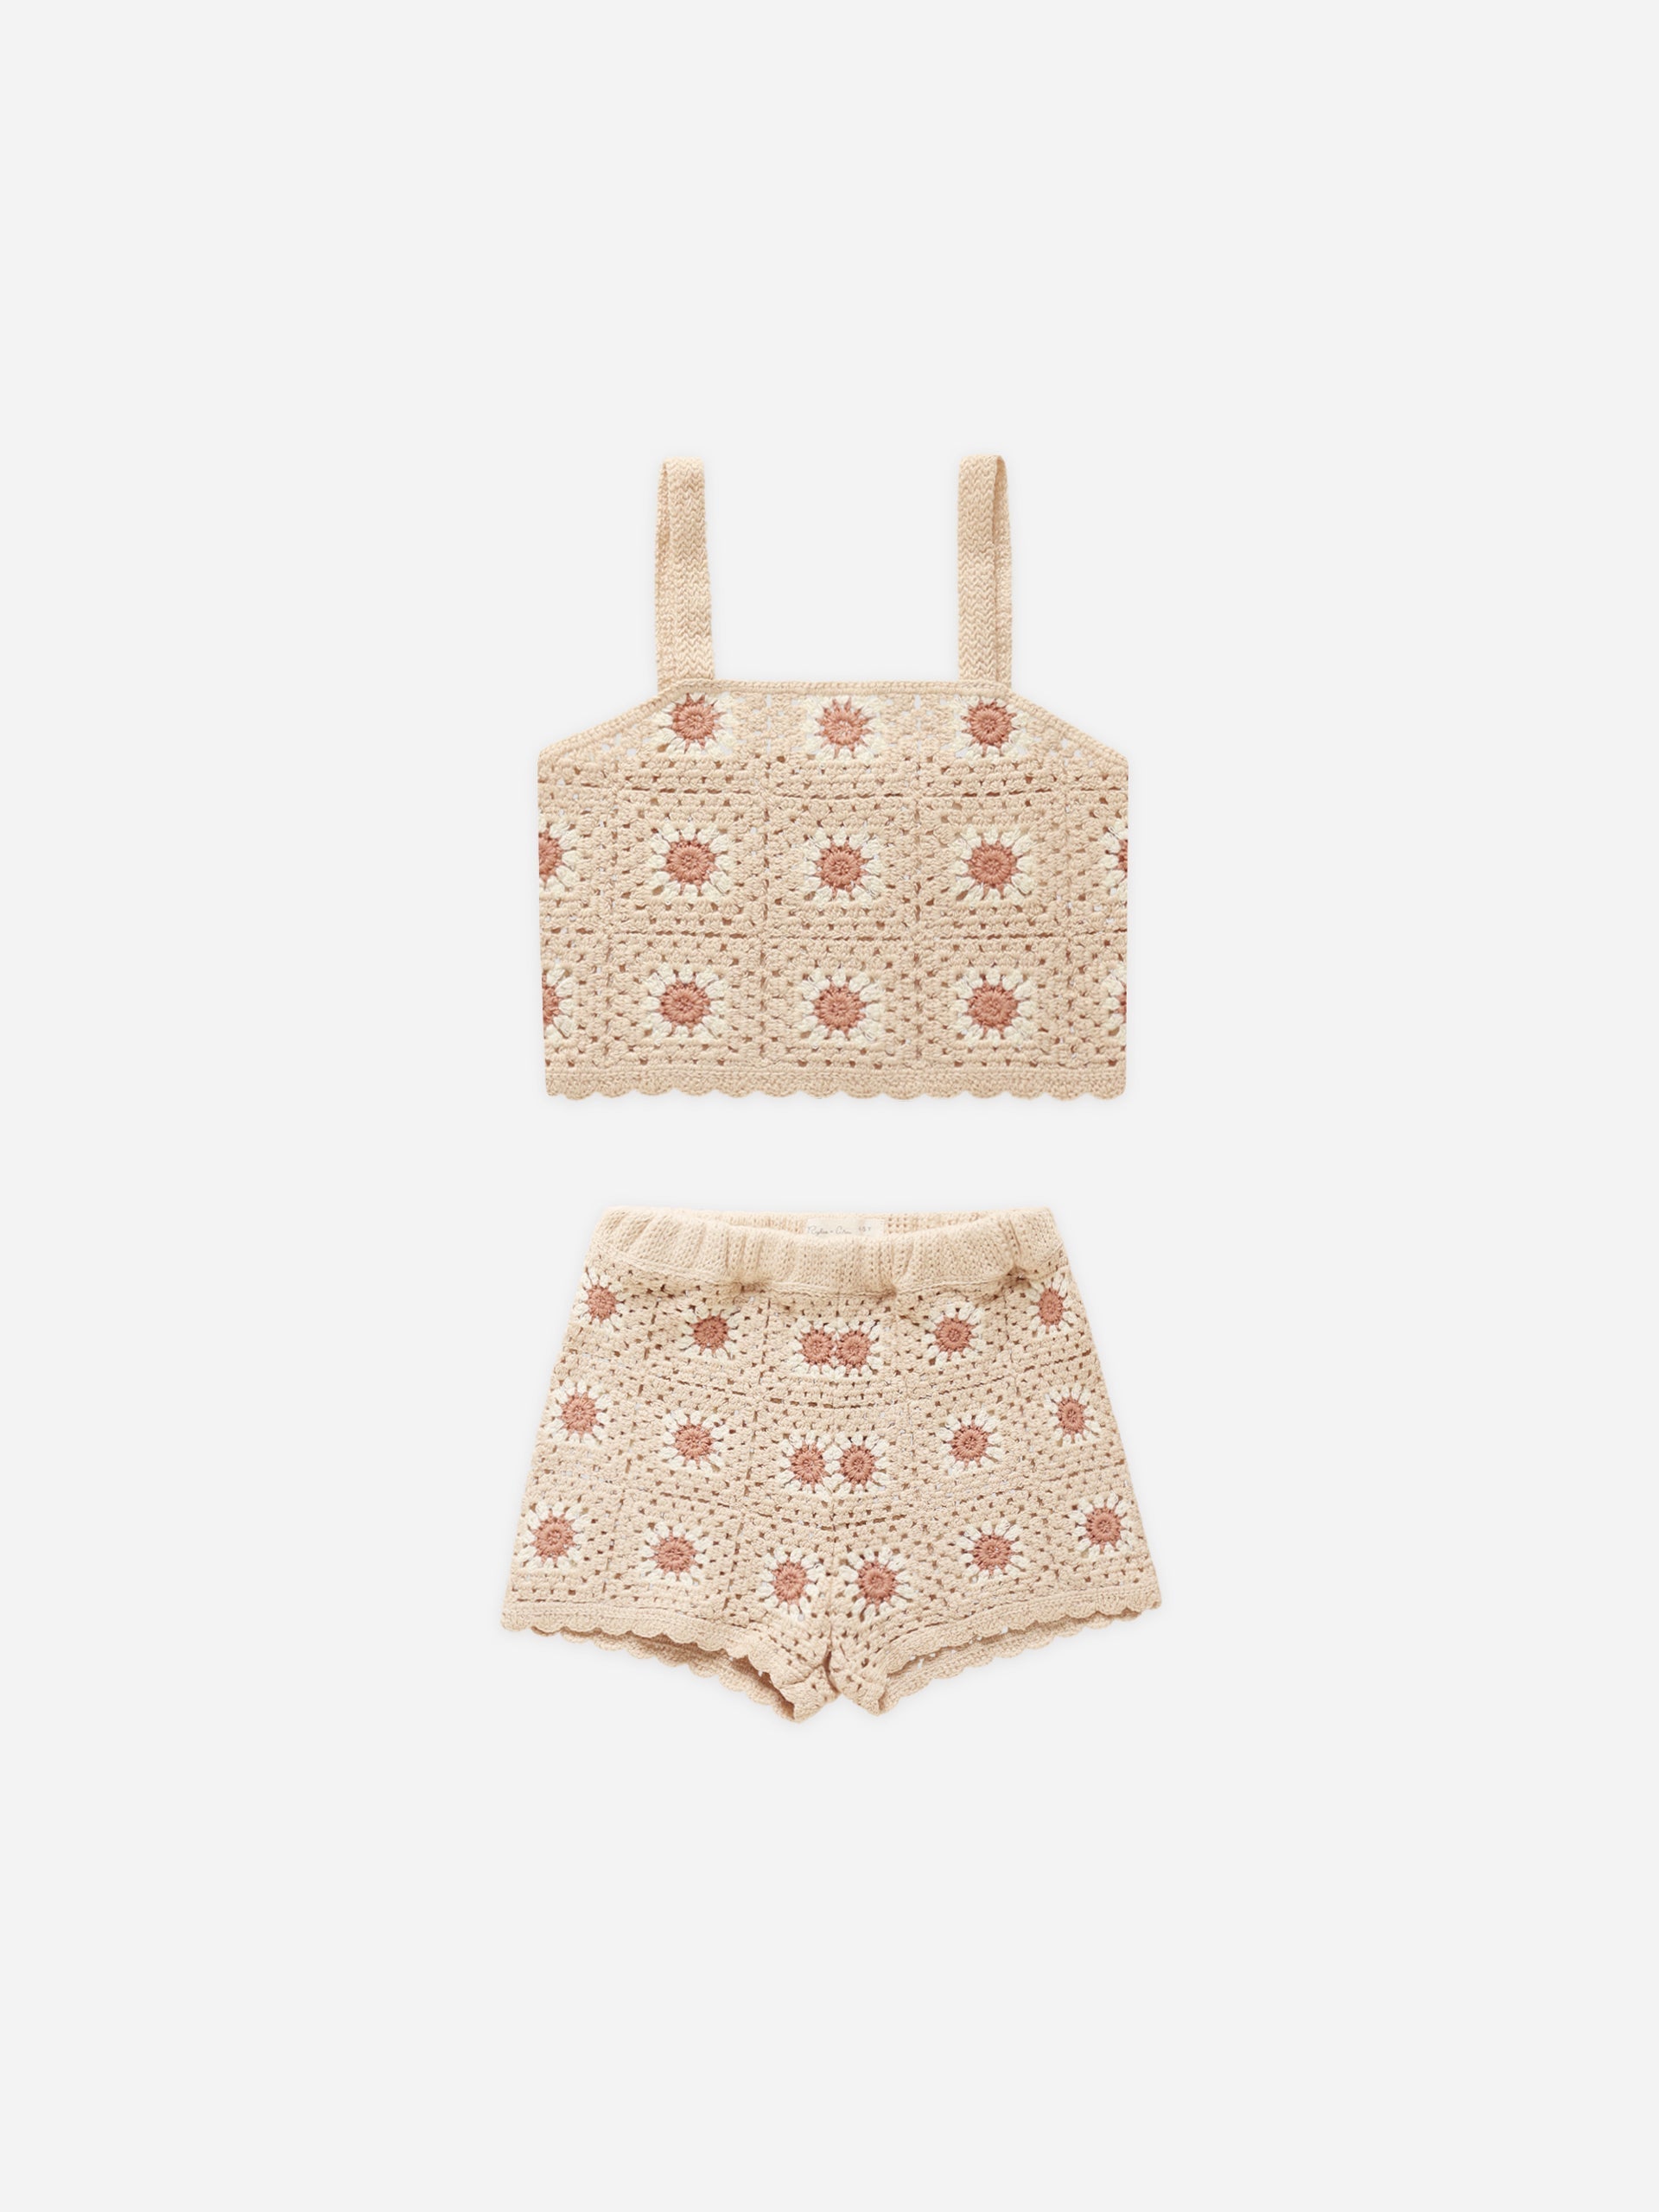 Crochet Summer Set || Floral - Rylee + Cru | Kids Clothes | Trendy Baby Clothes | Modern Infant Outfits |